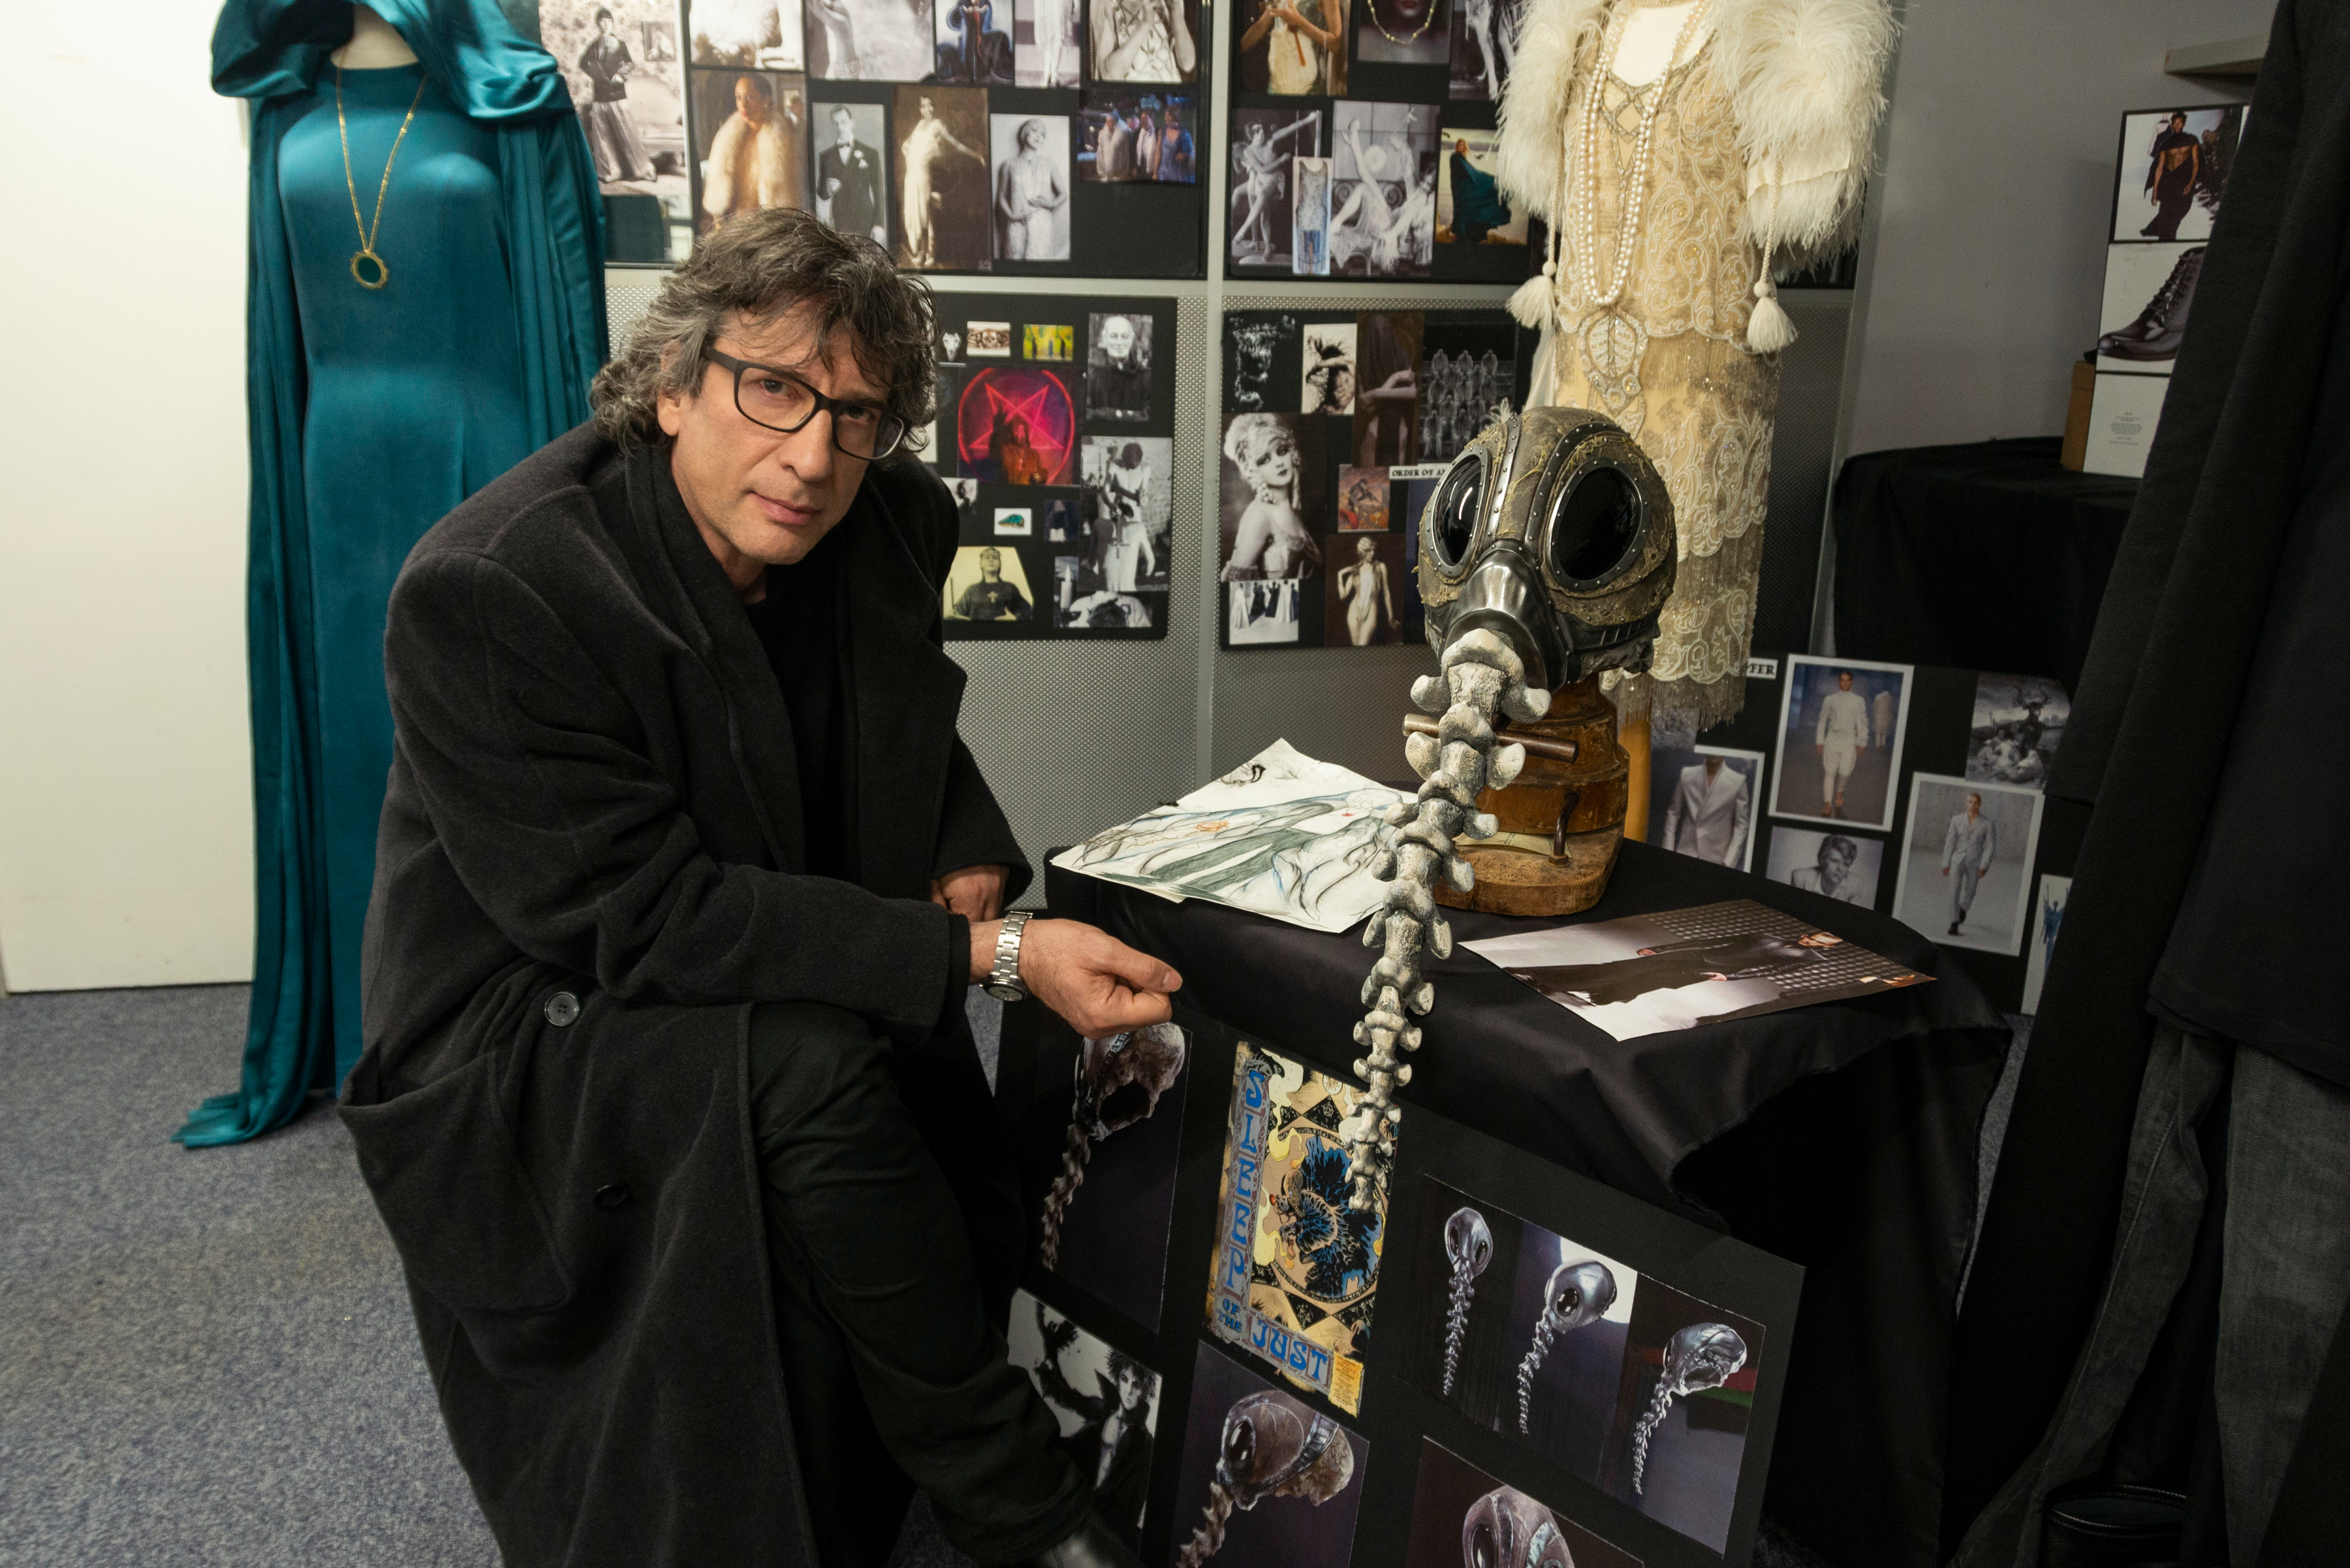 Writer Neil Gaiman on the set of 'The Sandman.' What is author Neil Gaiman best known for? His resumé includes much more than the live-action 'The Sandman.'